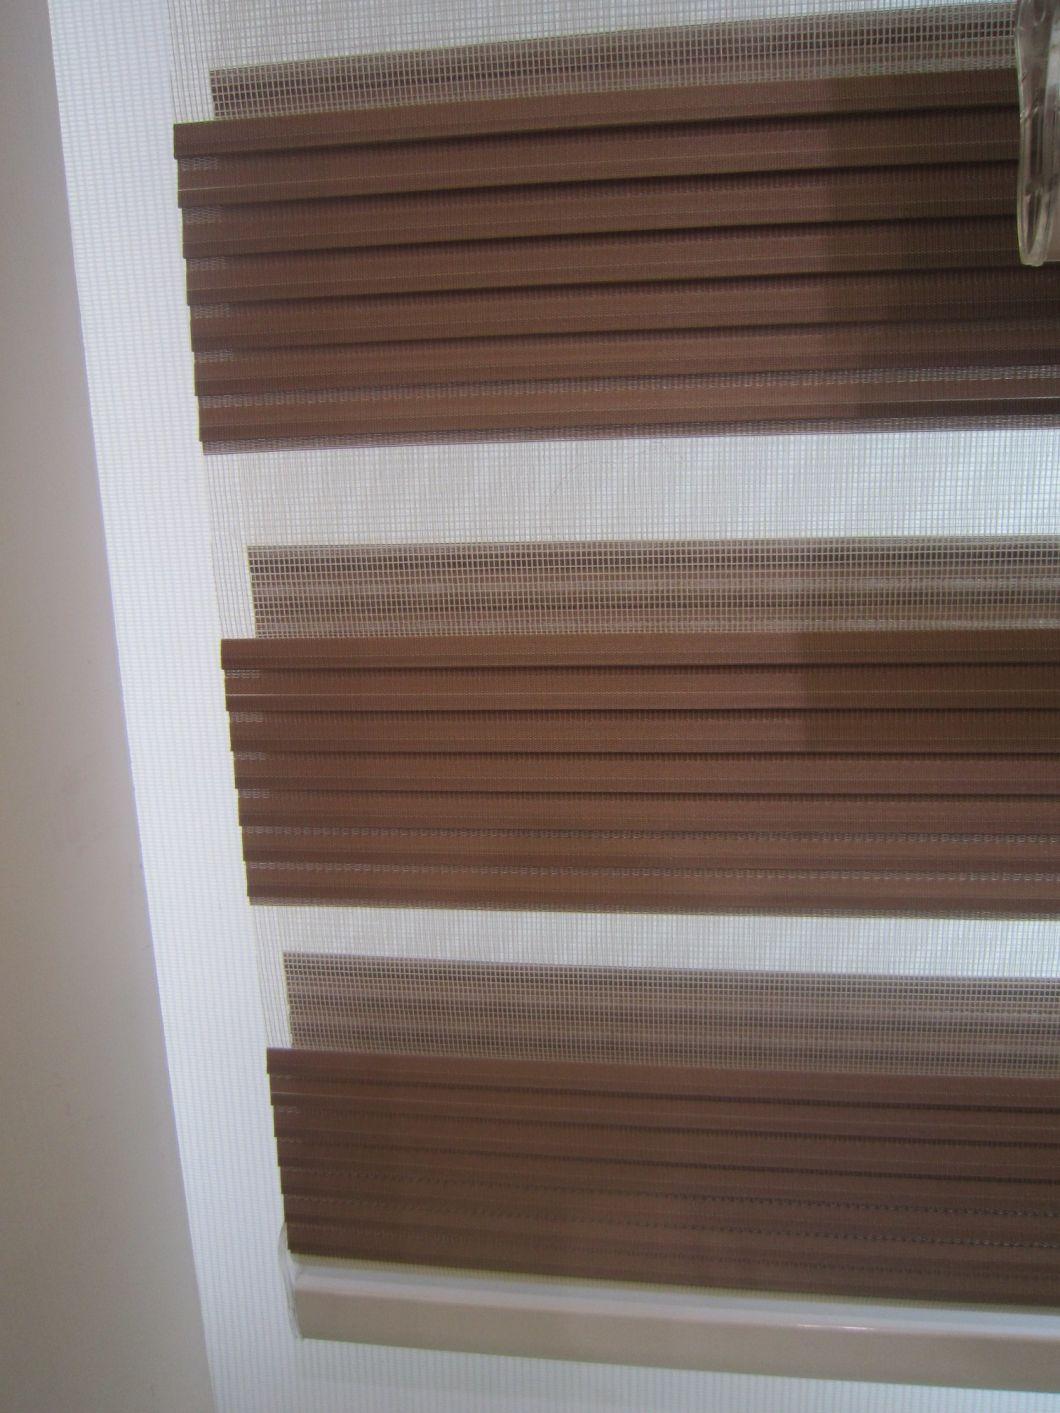 Zebra Blinds/Day Night Roller Blinds/Double Roller Blinds/Home Window Decorate Waterproof Window Blackout Roller Blinds/PVC Coated Blinds/White Coating Shade